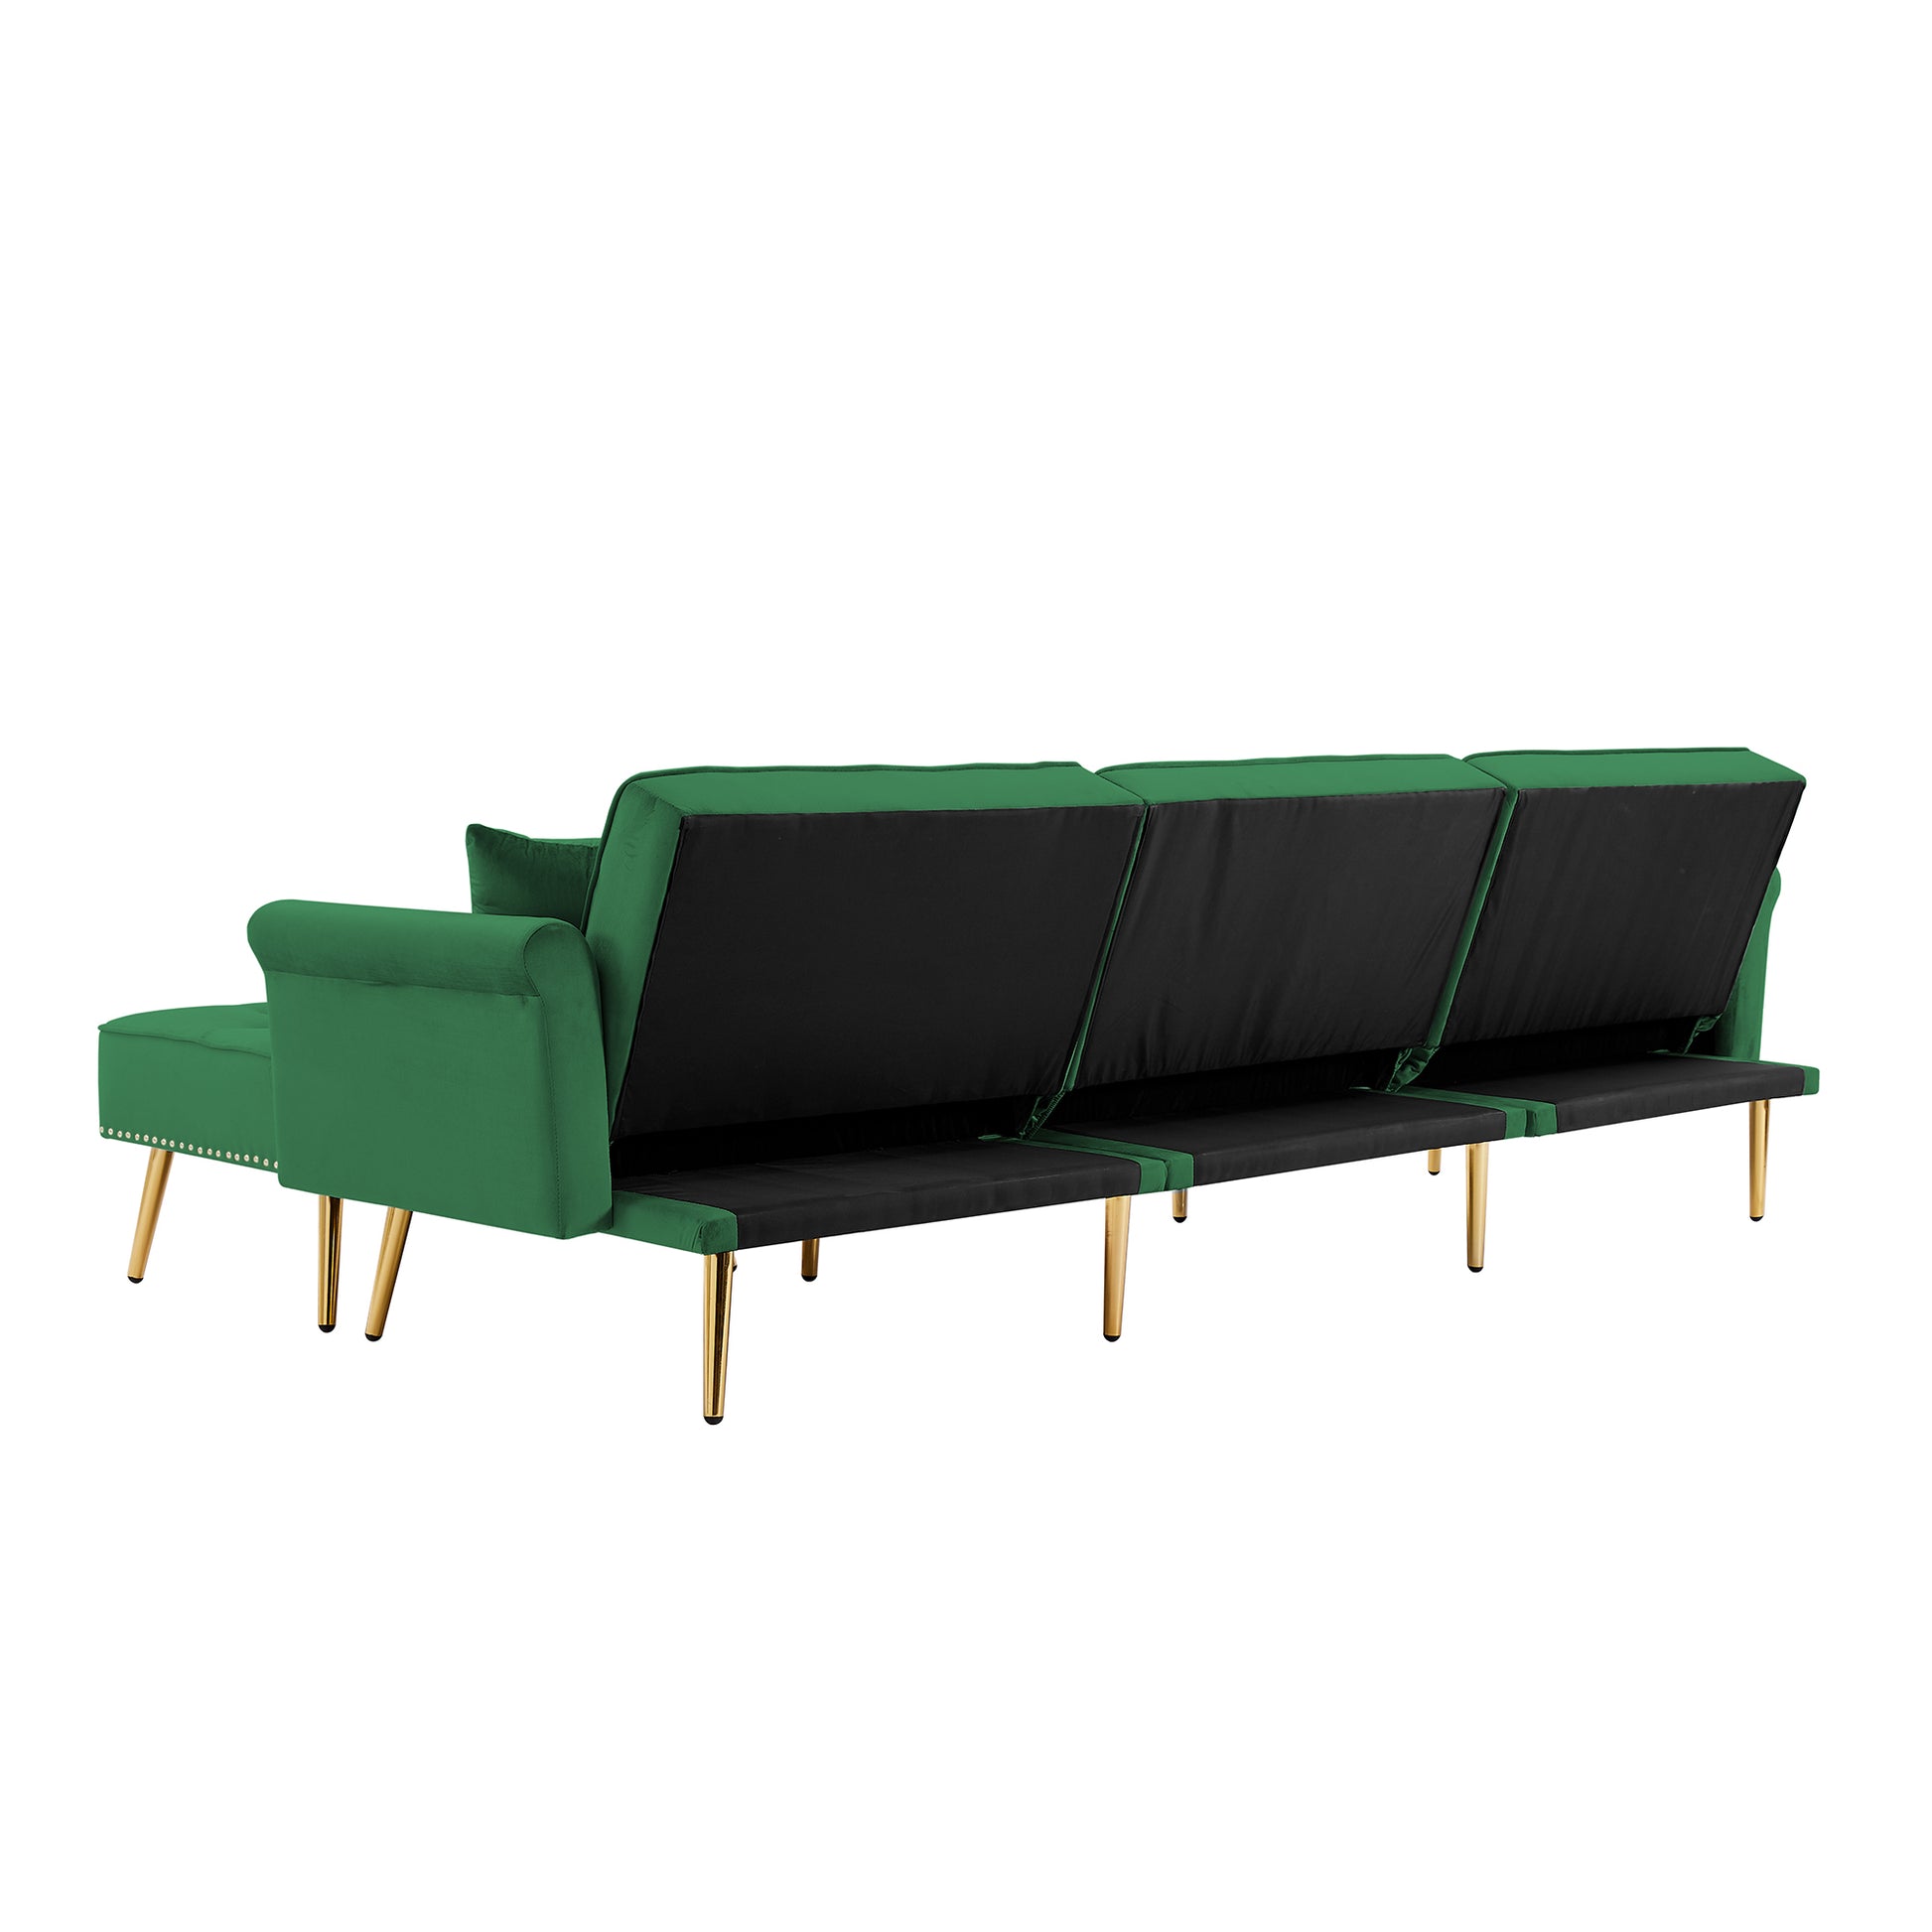 Modern Velvet Upholstered Reversible Sectional Sofa Bed , L-Shaped Couch with Movable Ottoman and Nailhead Trim For Living Room. (Green) - Enova Luxe Home Store